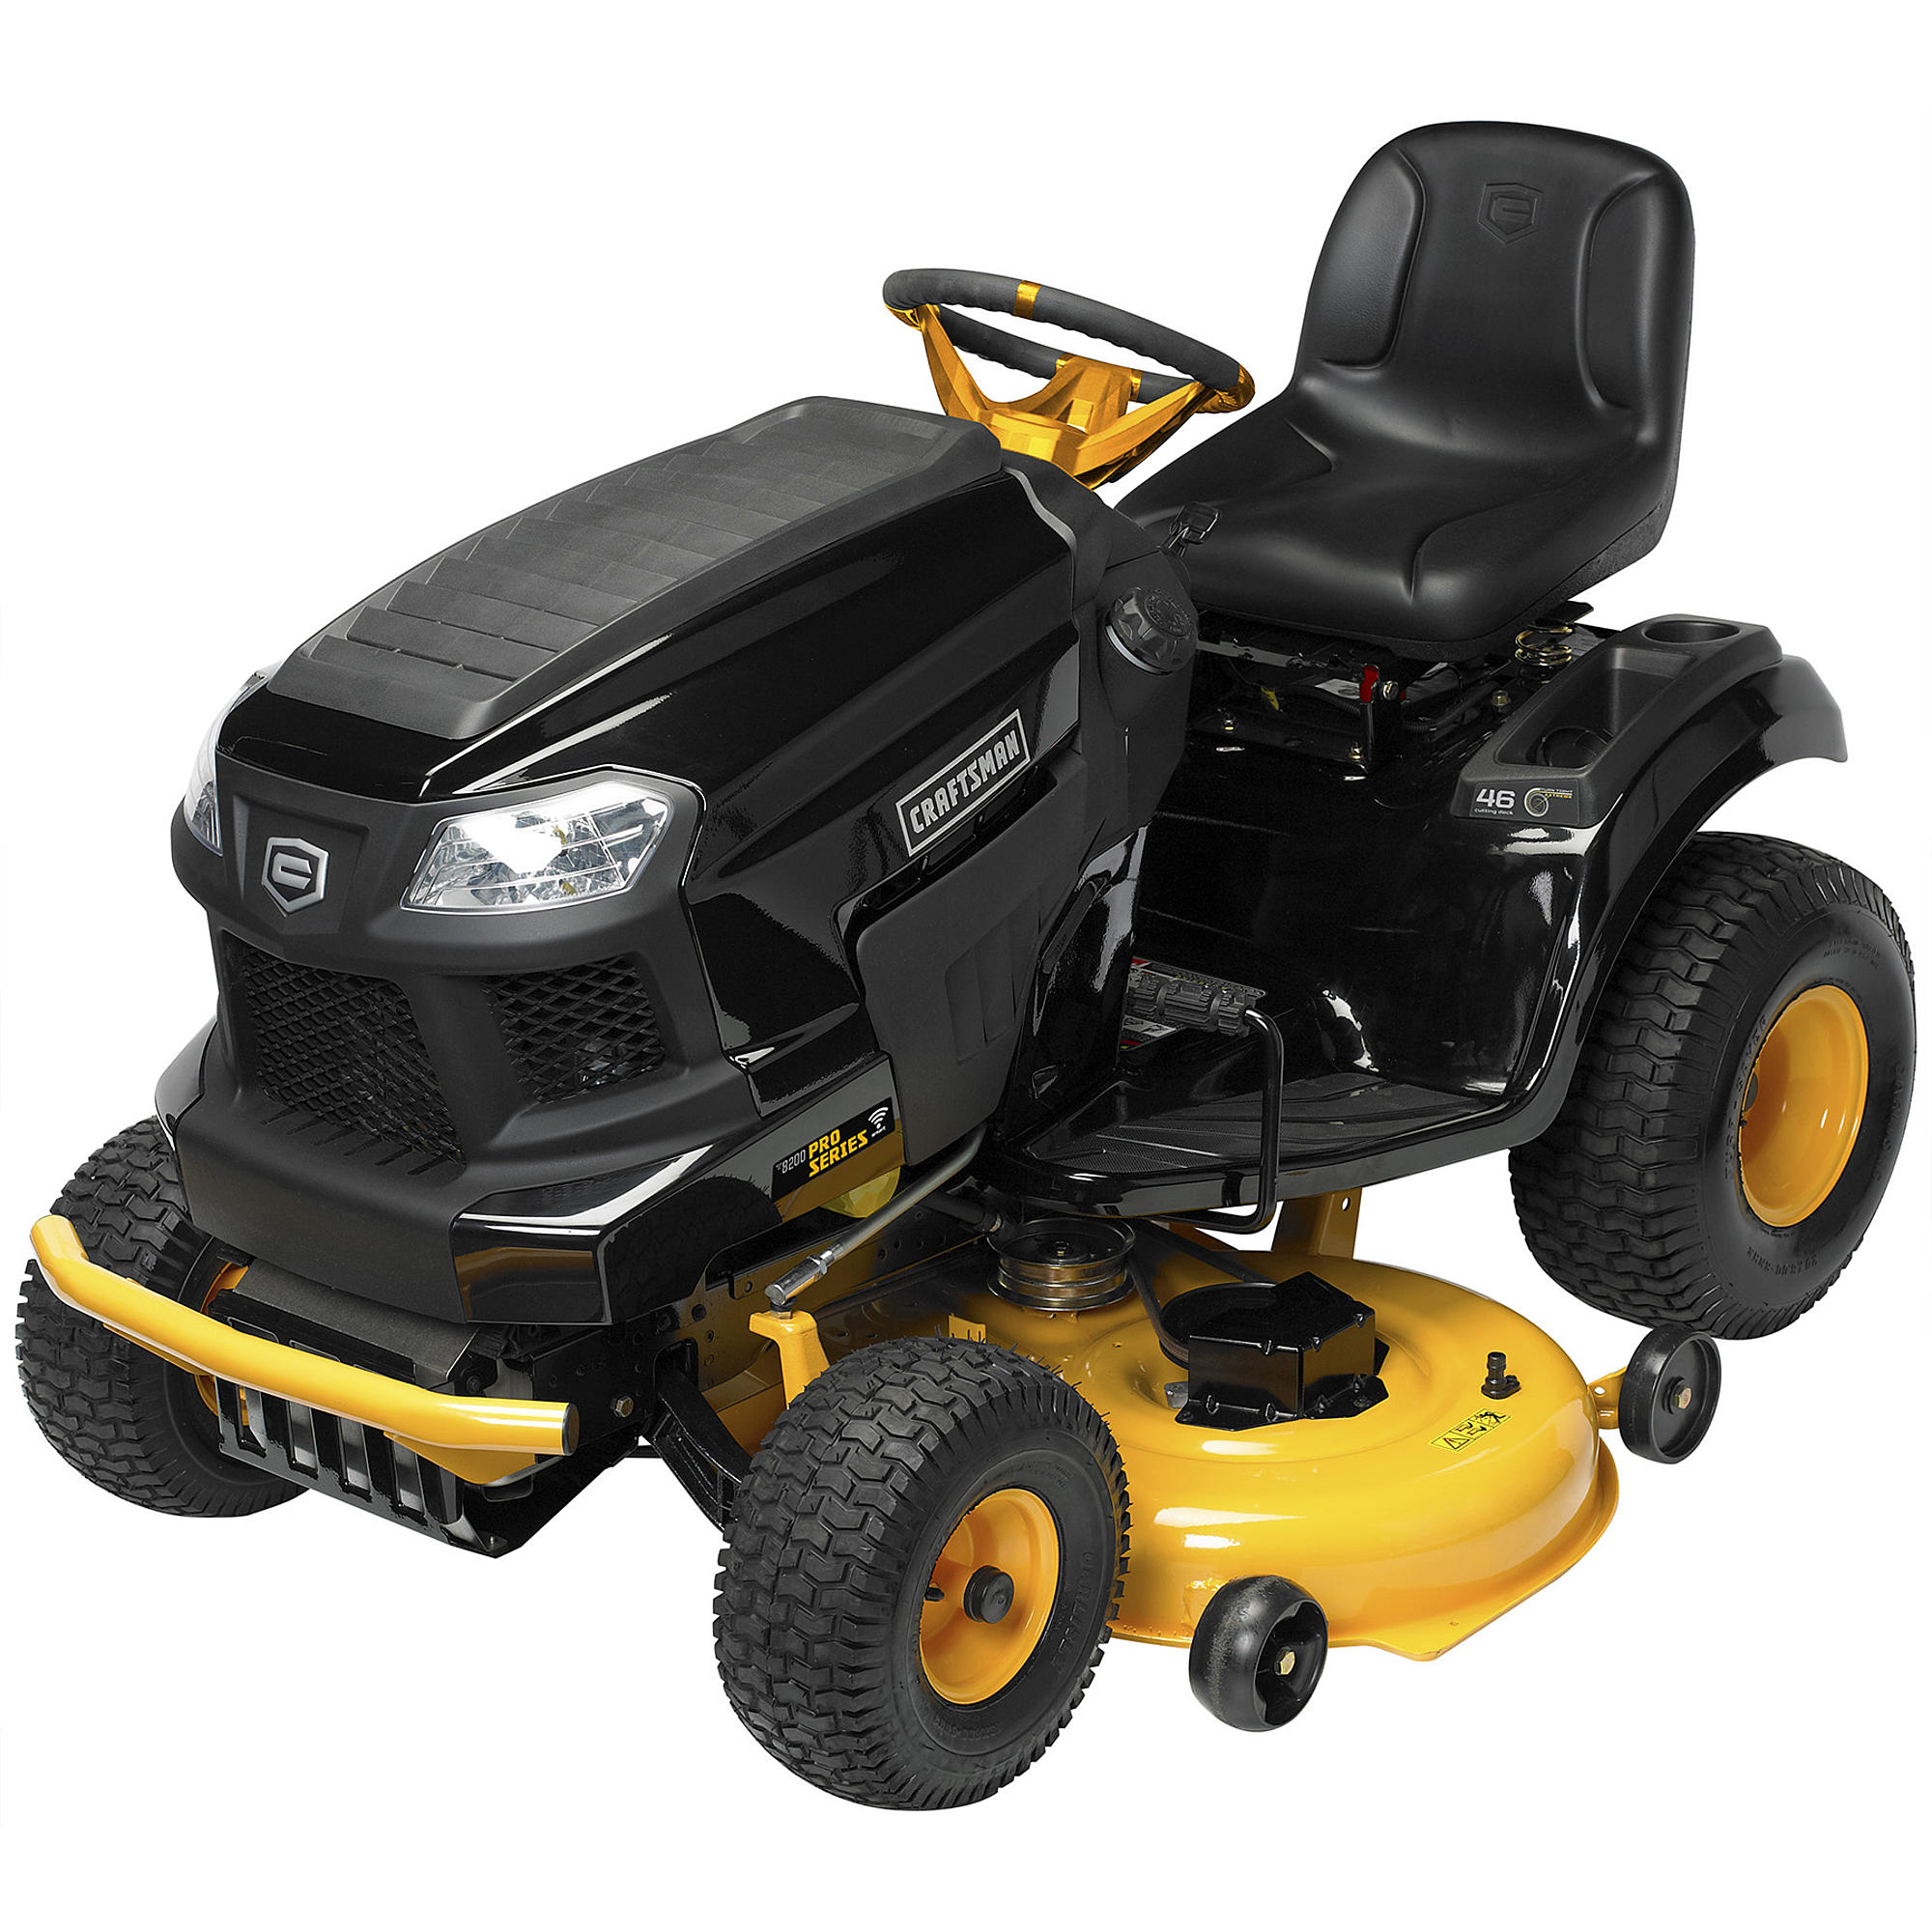 Craftsman Pro Series 46 inch 24 HP V-Twin Kohler Hydrostatic TurnTight Extreme® Riding Mower w/ Smart Lawn Bluetooth Technology $1869.99 + $93.70SYW (RETAIL PRICE $2499)